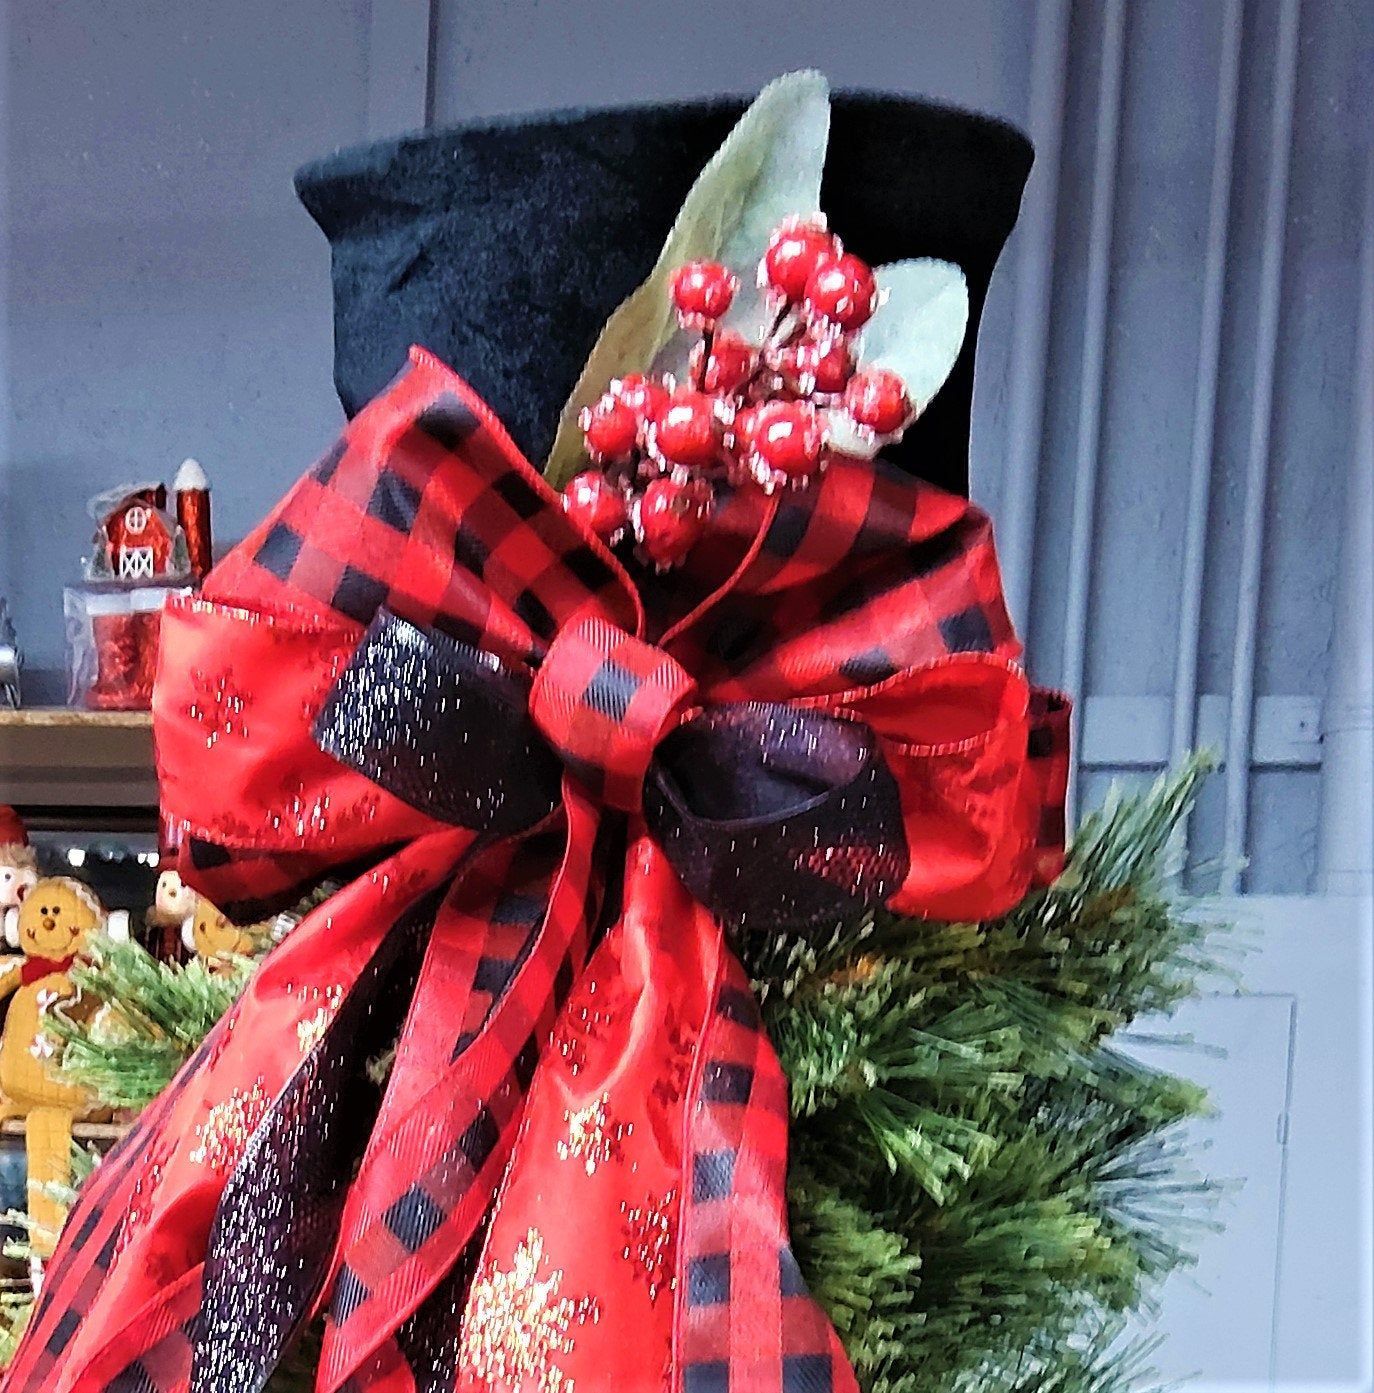 Top hat Tree Topper with berries, bows and ribbons - Top hat Tree Topper with berries, bows and ribbons -   16 rustic christmas tree topper burlap bows ideas